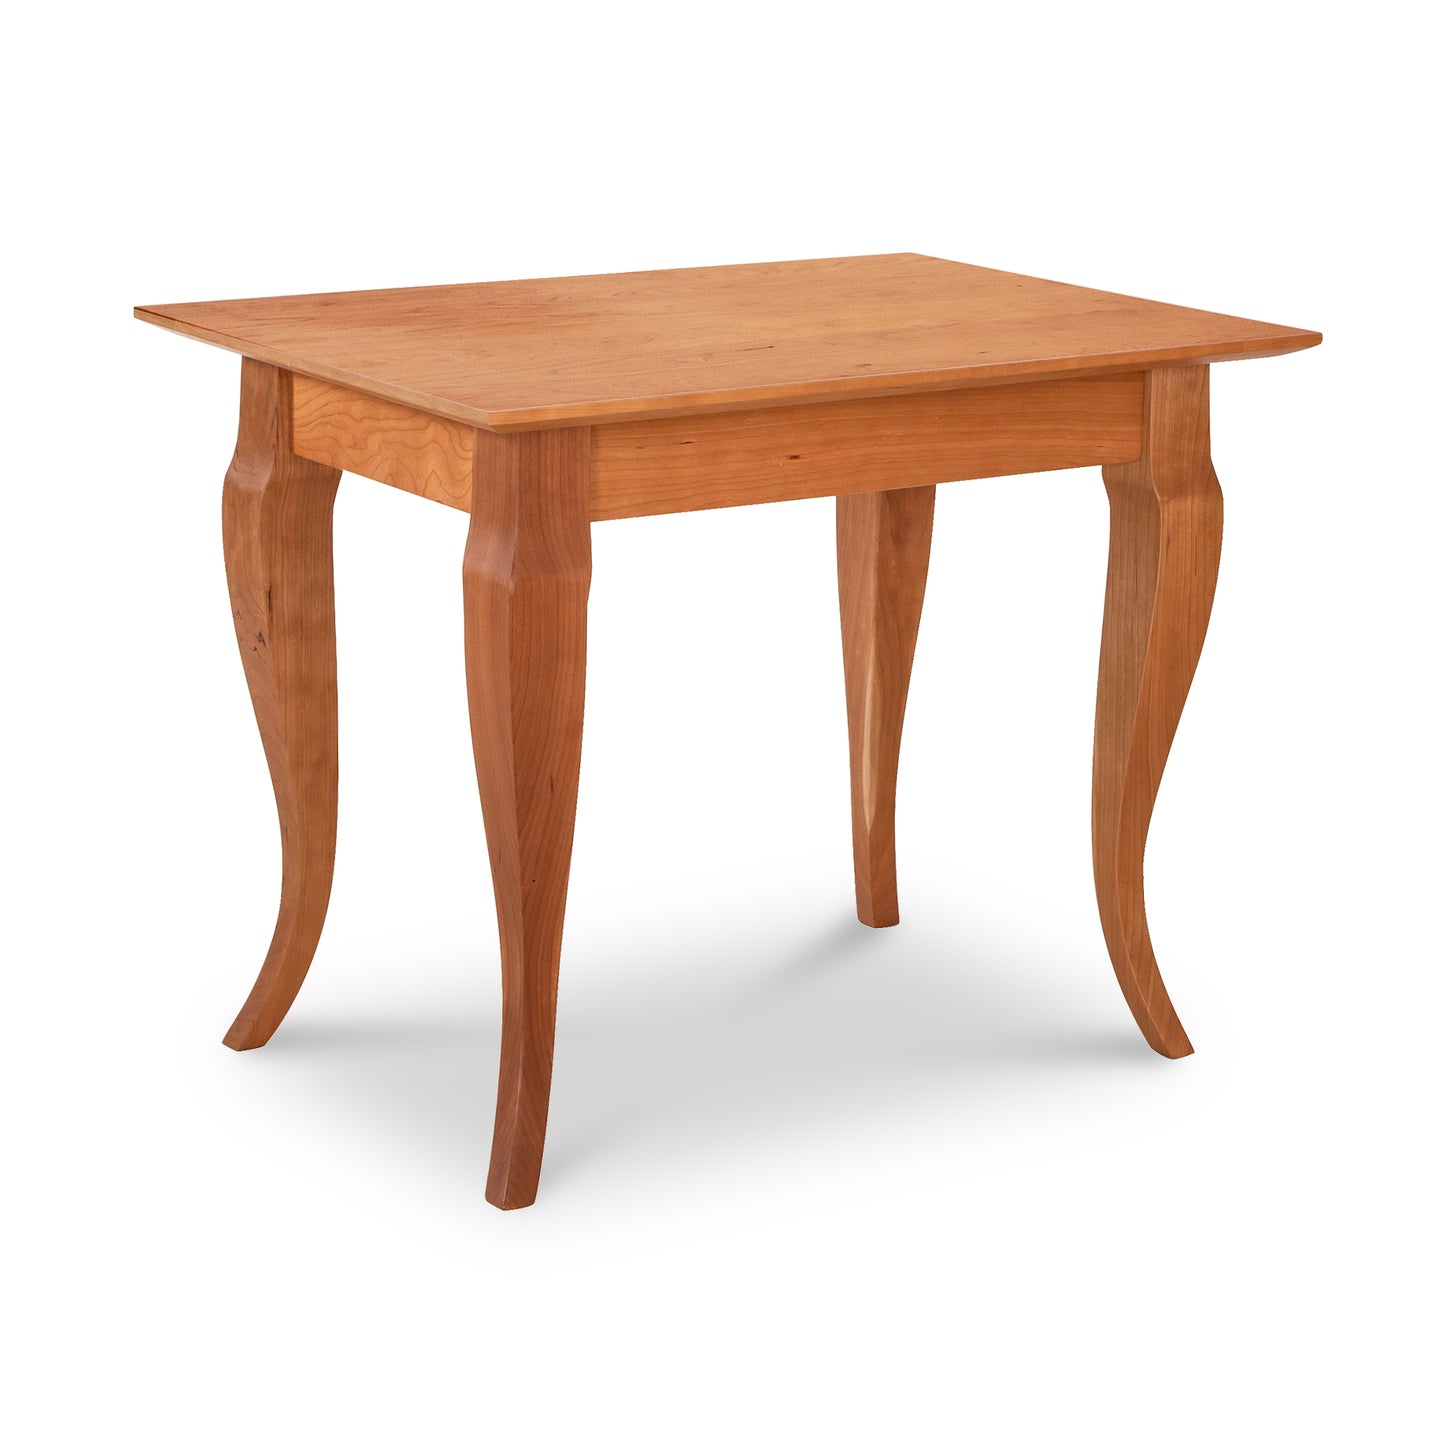 A luxury French Country Lyndon Furniture end table with a solid wood top and legs.